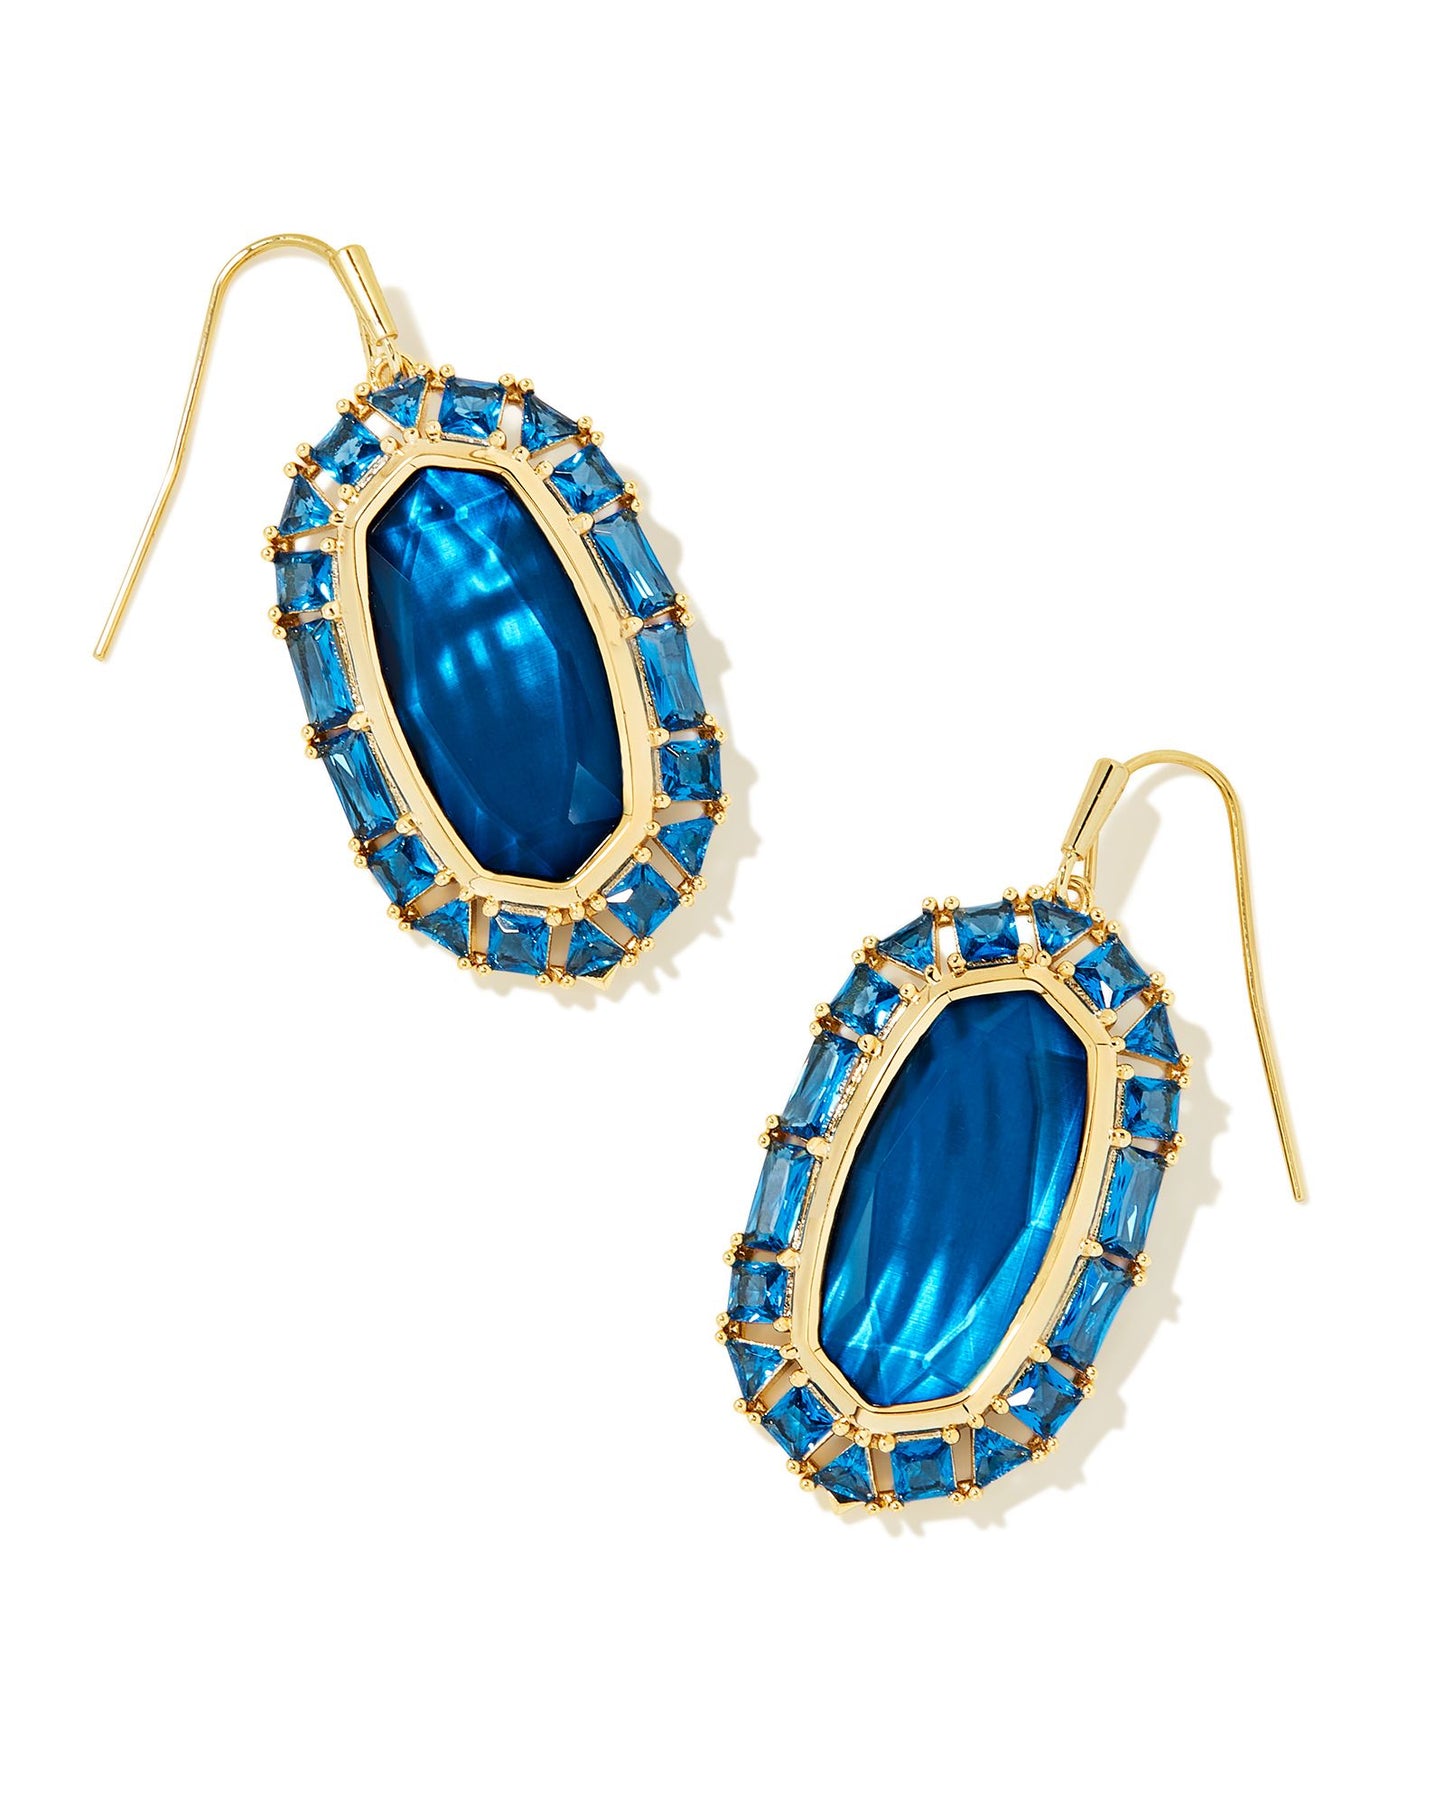 Our iconic statement earrings get a luxurious crystal frame in the Elle Gold Crystal Frame Drop Earrings. Featuring baguette, trillion, and princess cut crystals, these earrings give off an oh-so-glamorous sparkle with every turn of your head. Gold sea blue illusion 